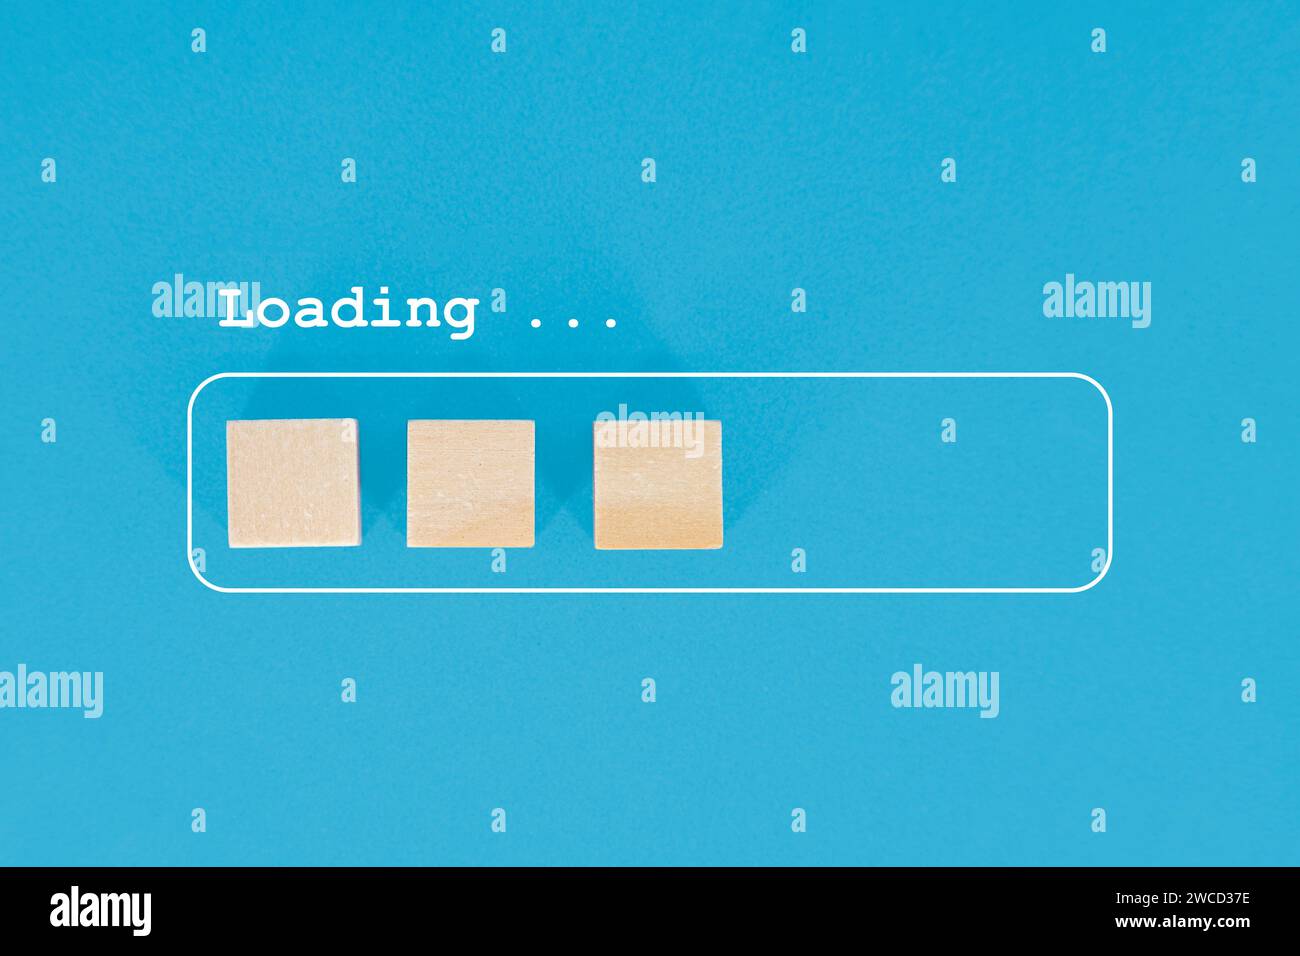 Minimalist visual metaphor of a loading progress bar depicted by wooden blocks on a blue background. Stock Photo